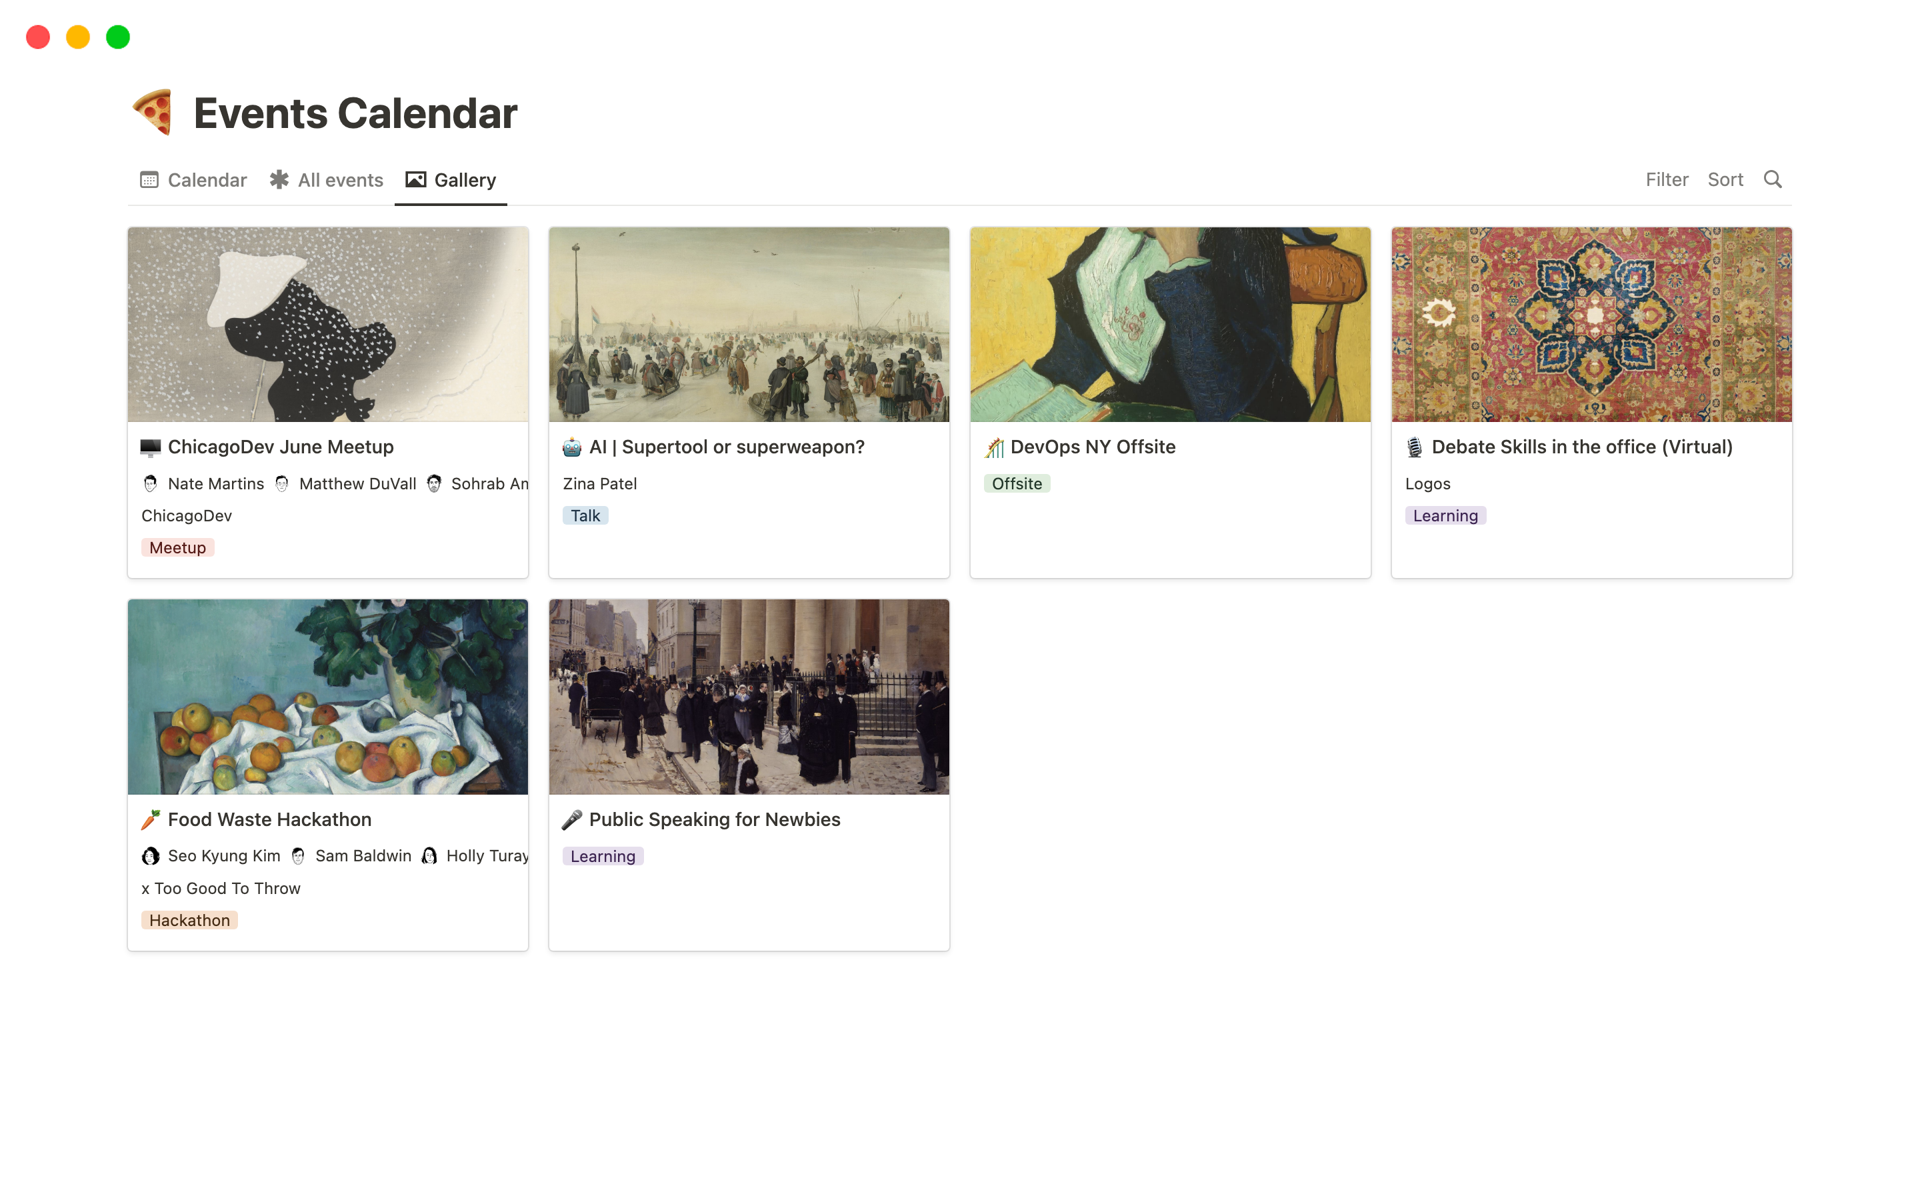 Keep your team informed and engaged with our interactive Events Calendar template.